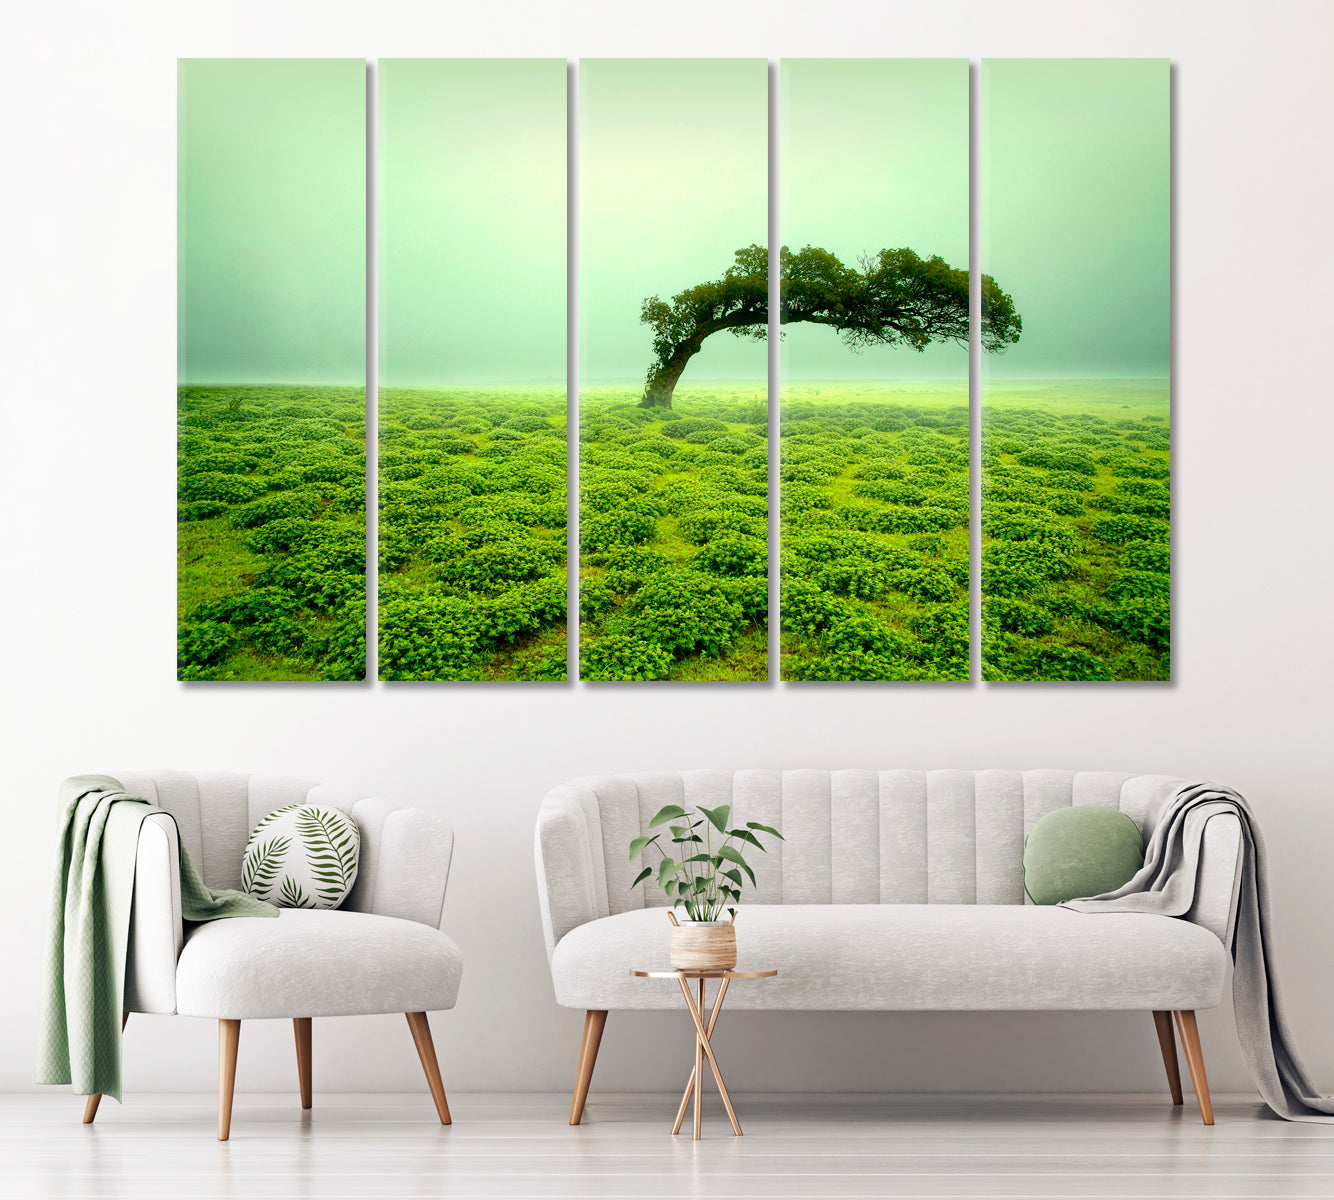 Beautiful Landscape with Lonely Tree Kaas Plateau India Canvas Print ArtLexy 5 Panels 36"x24" inches 